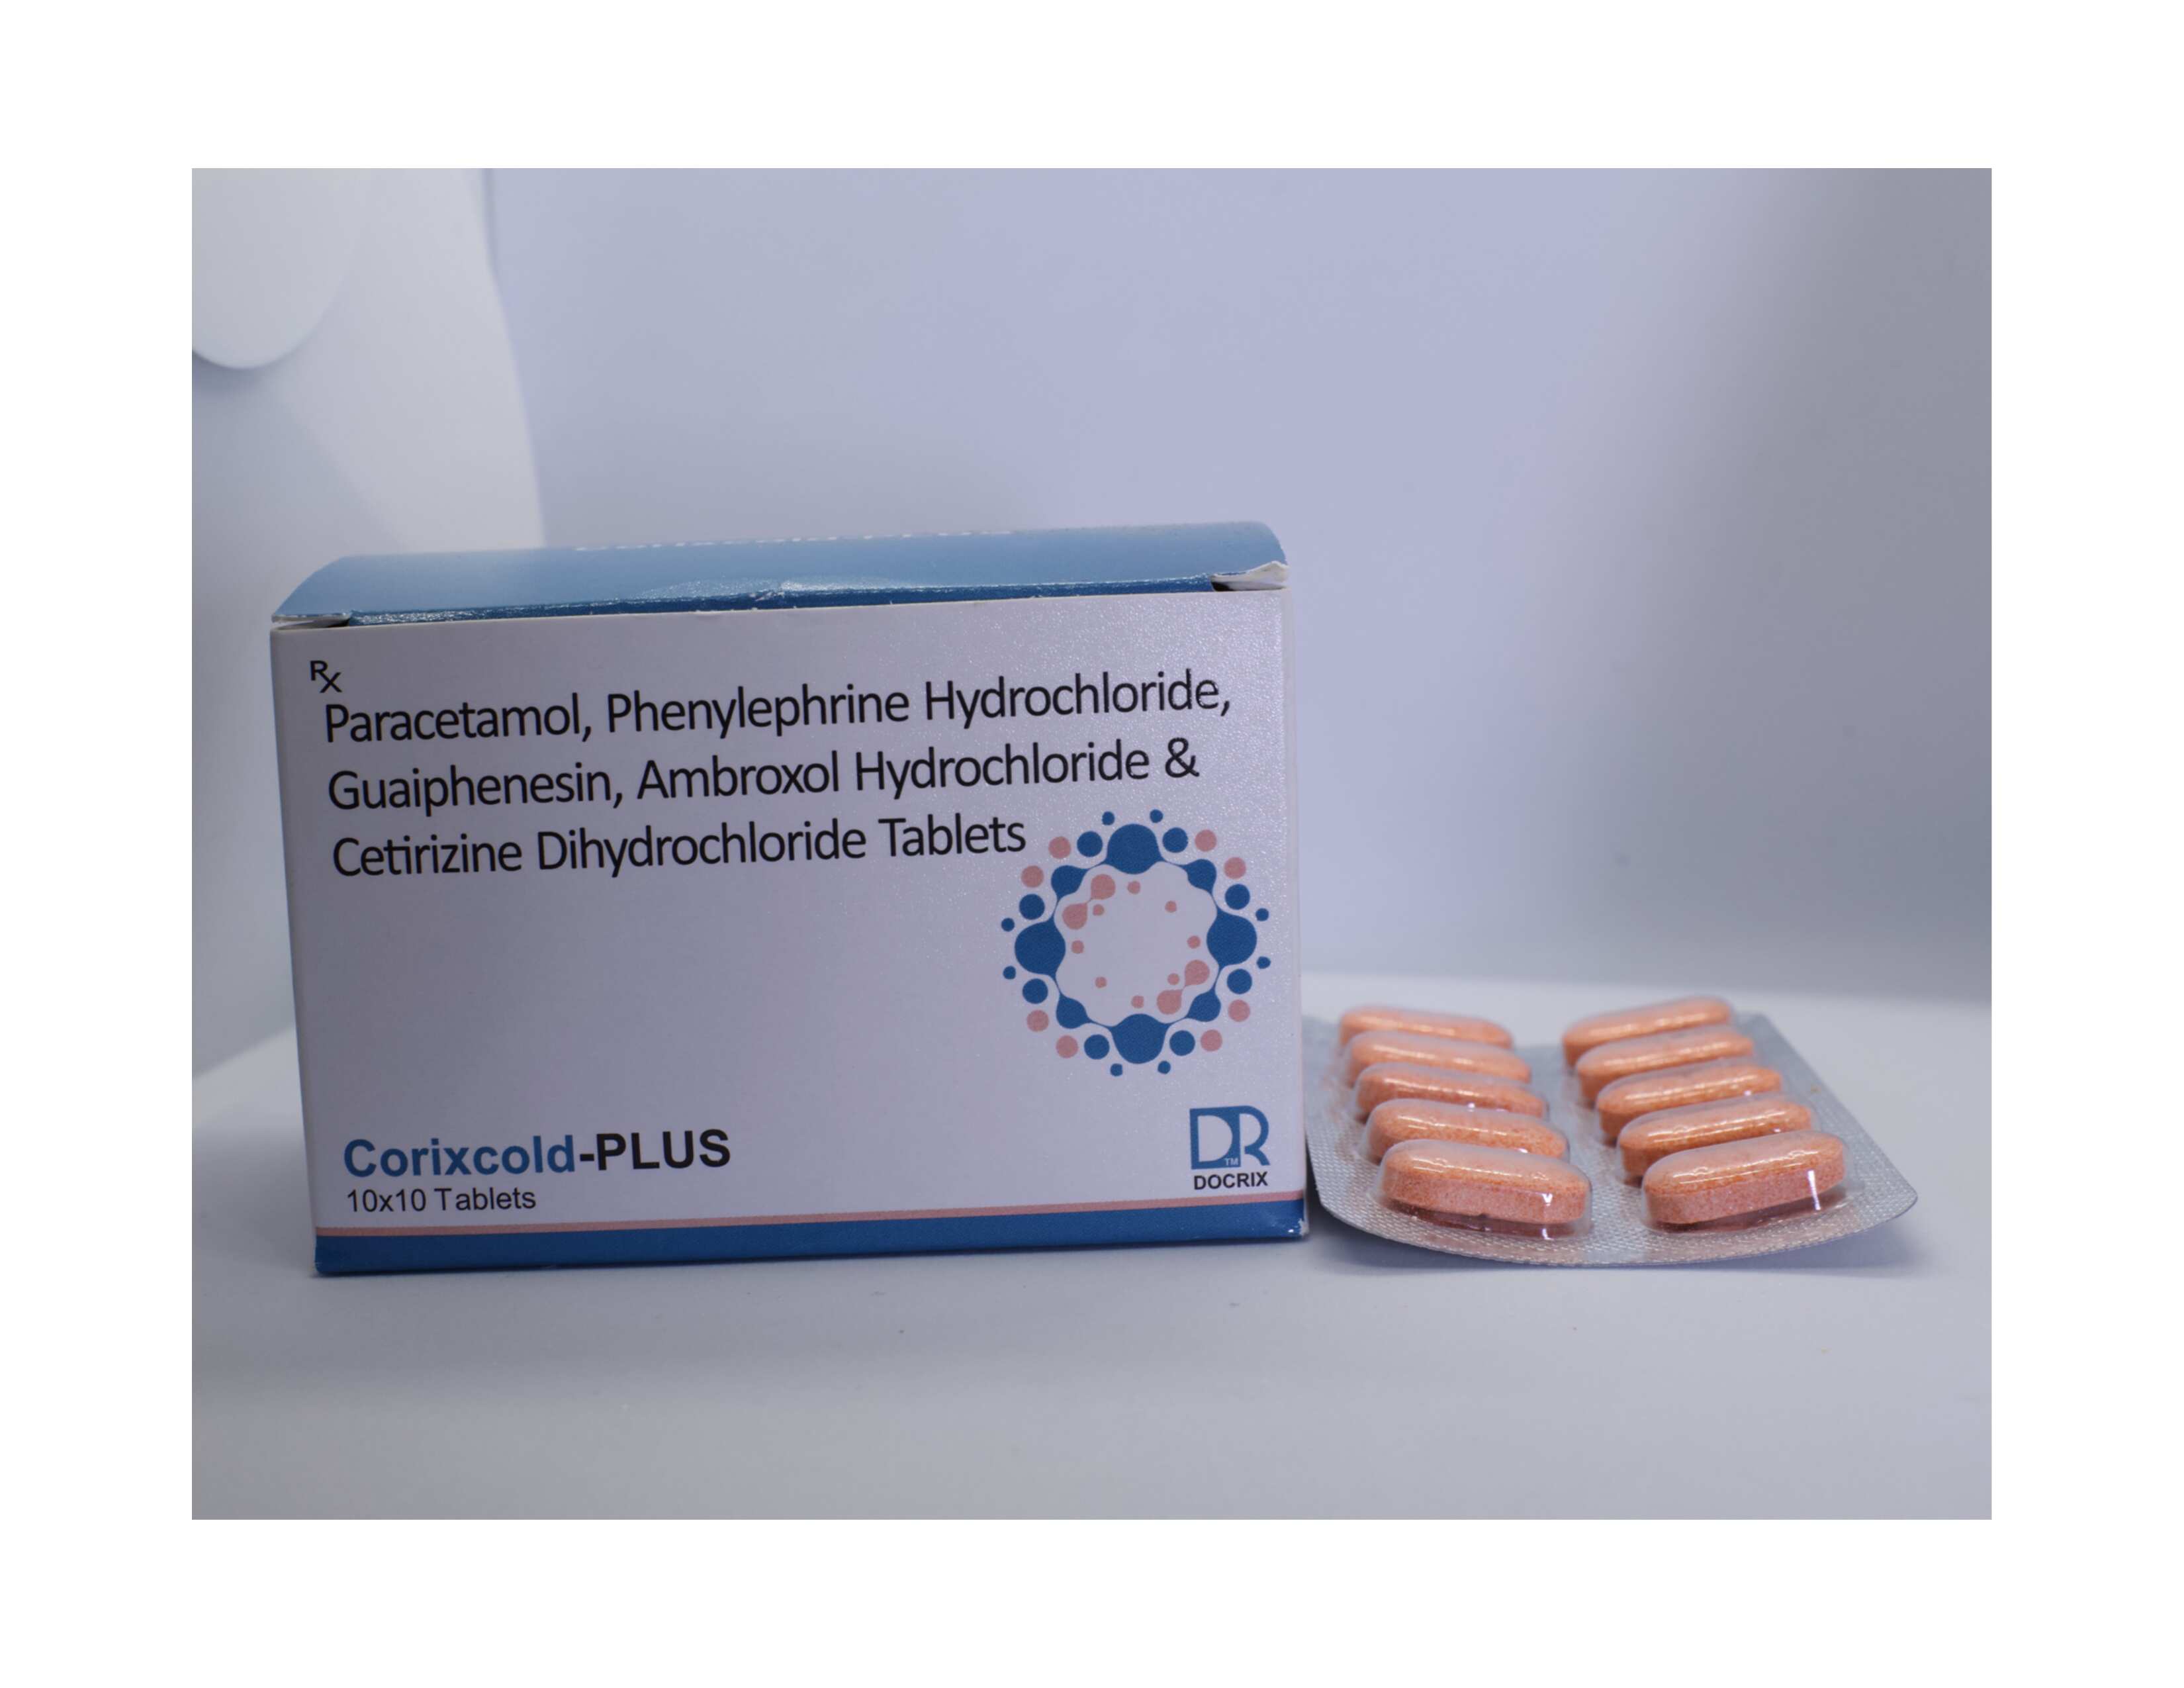 Product Name: Corixcold PLUS, Compositions of Corixcold PLUS are Paracetamol Phenylephrine Hydrochloride ,Guaiphenesin, Ambroxol Hydrochloride & Cetirizine Dihydrochloriden Tablets - Docrix Healthcare